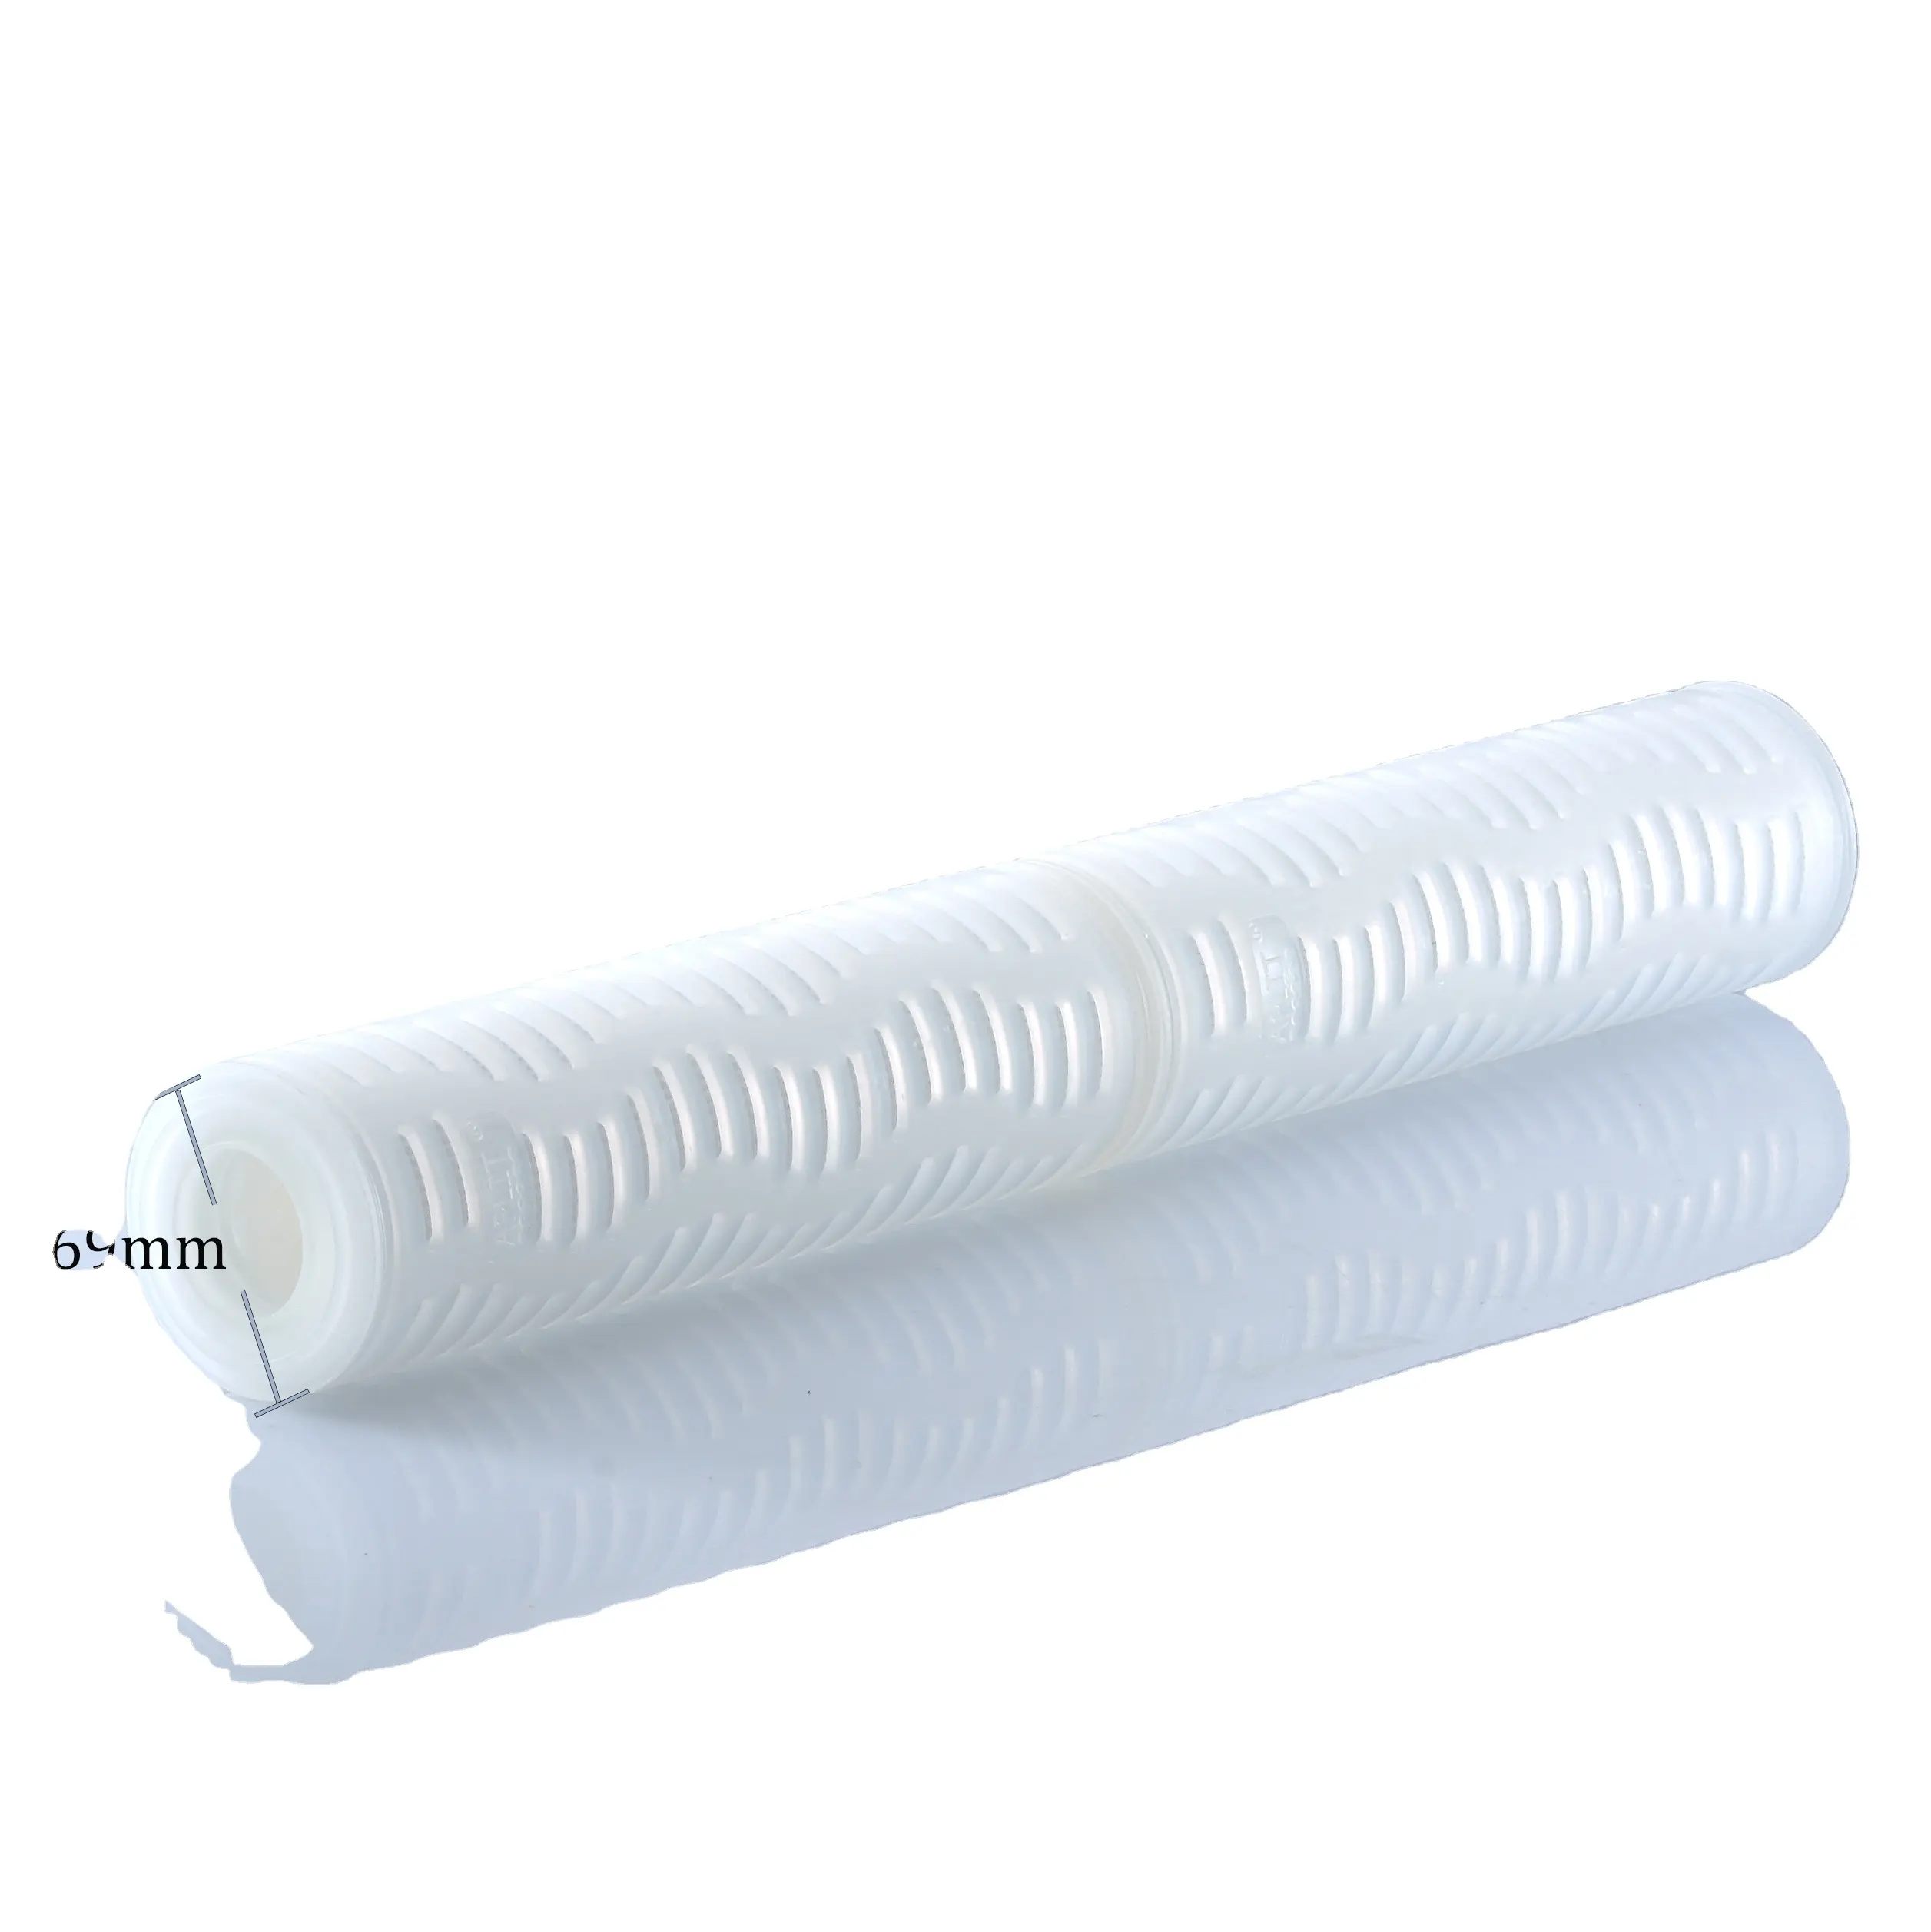 20" X 69 Mm PP Pleated Filter Cartridge With 226 For Industrial Chemical Electronic Filtration Water Treatment